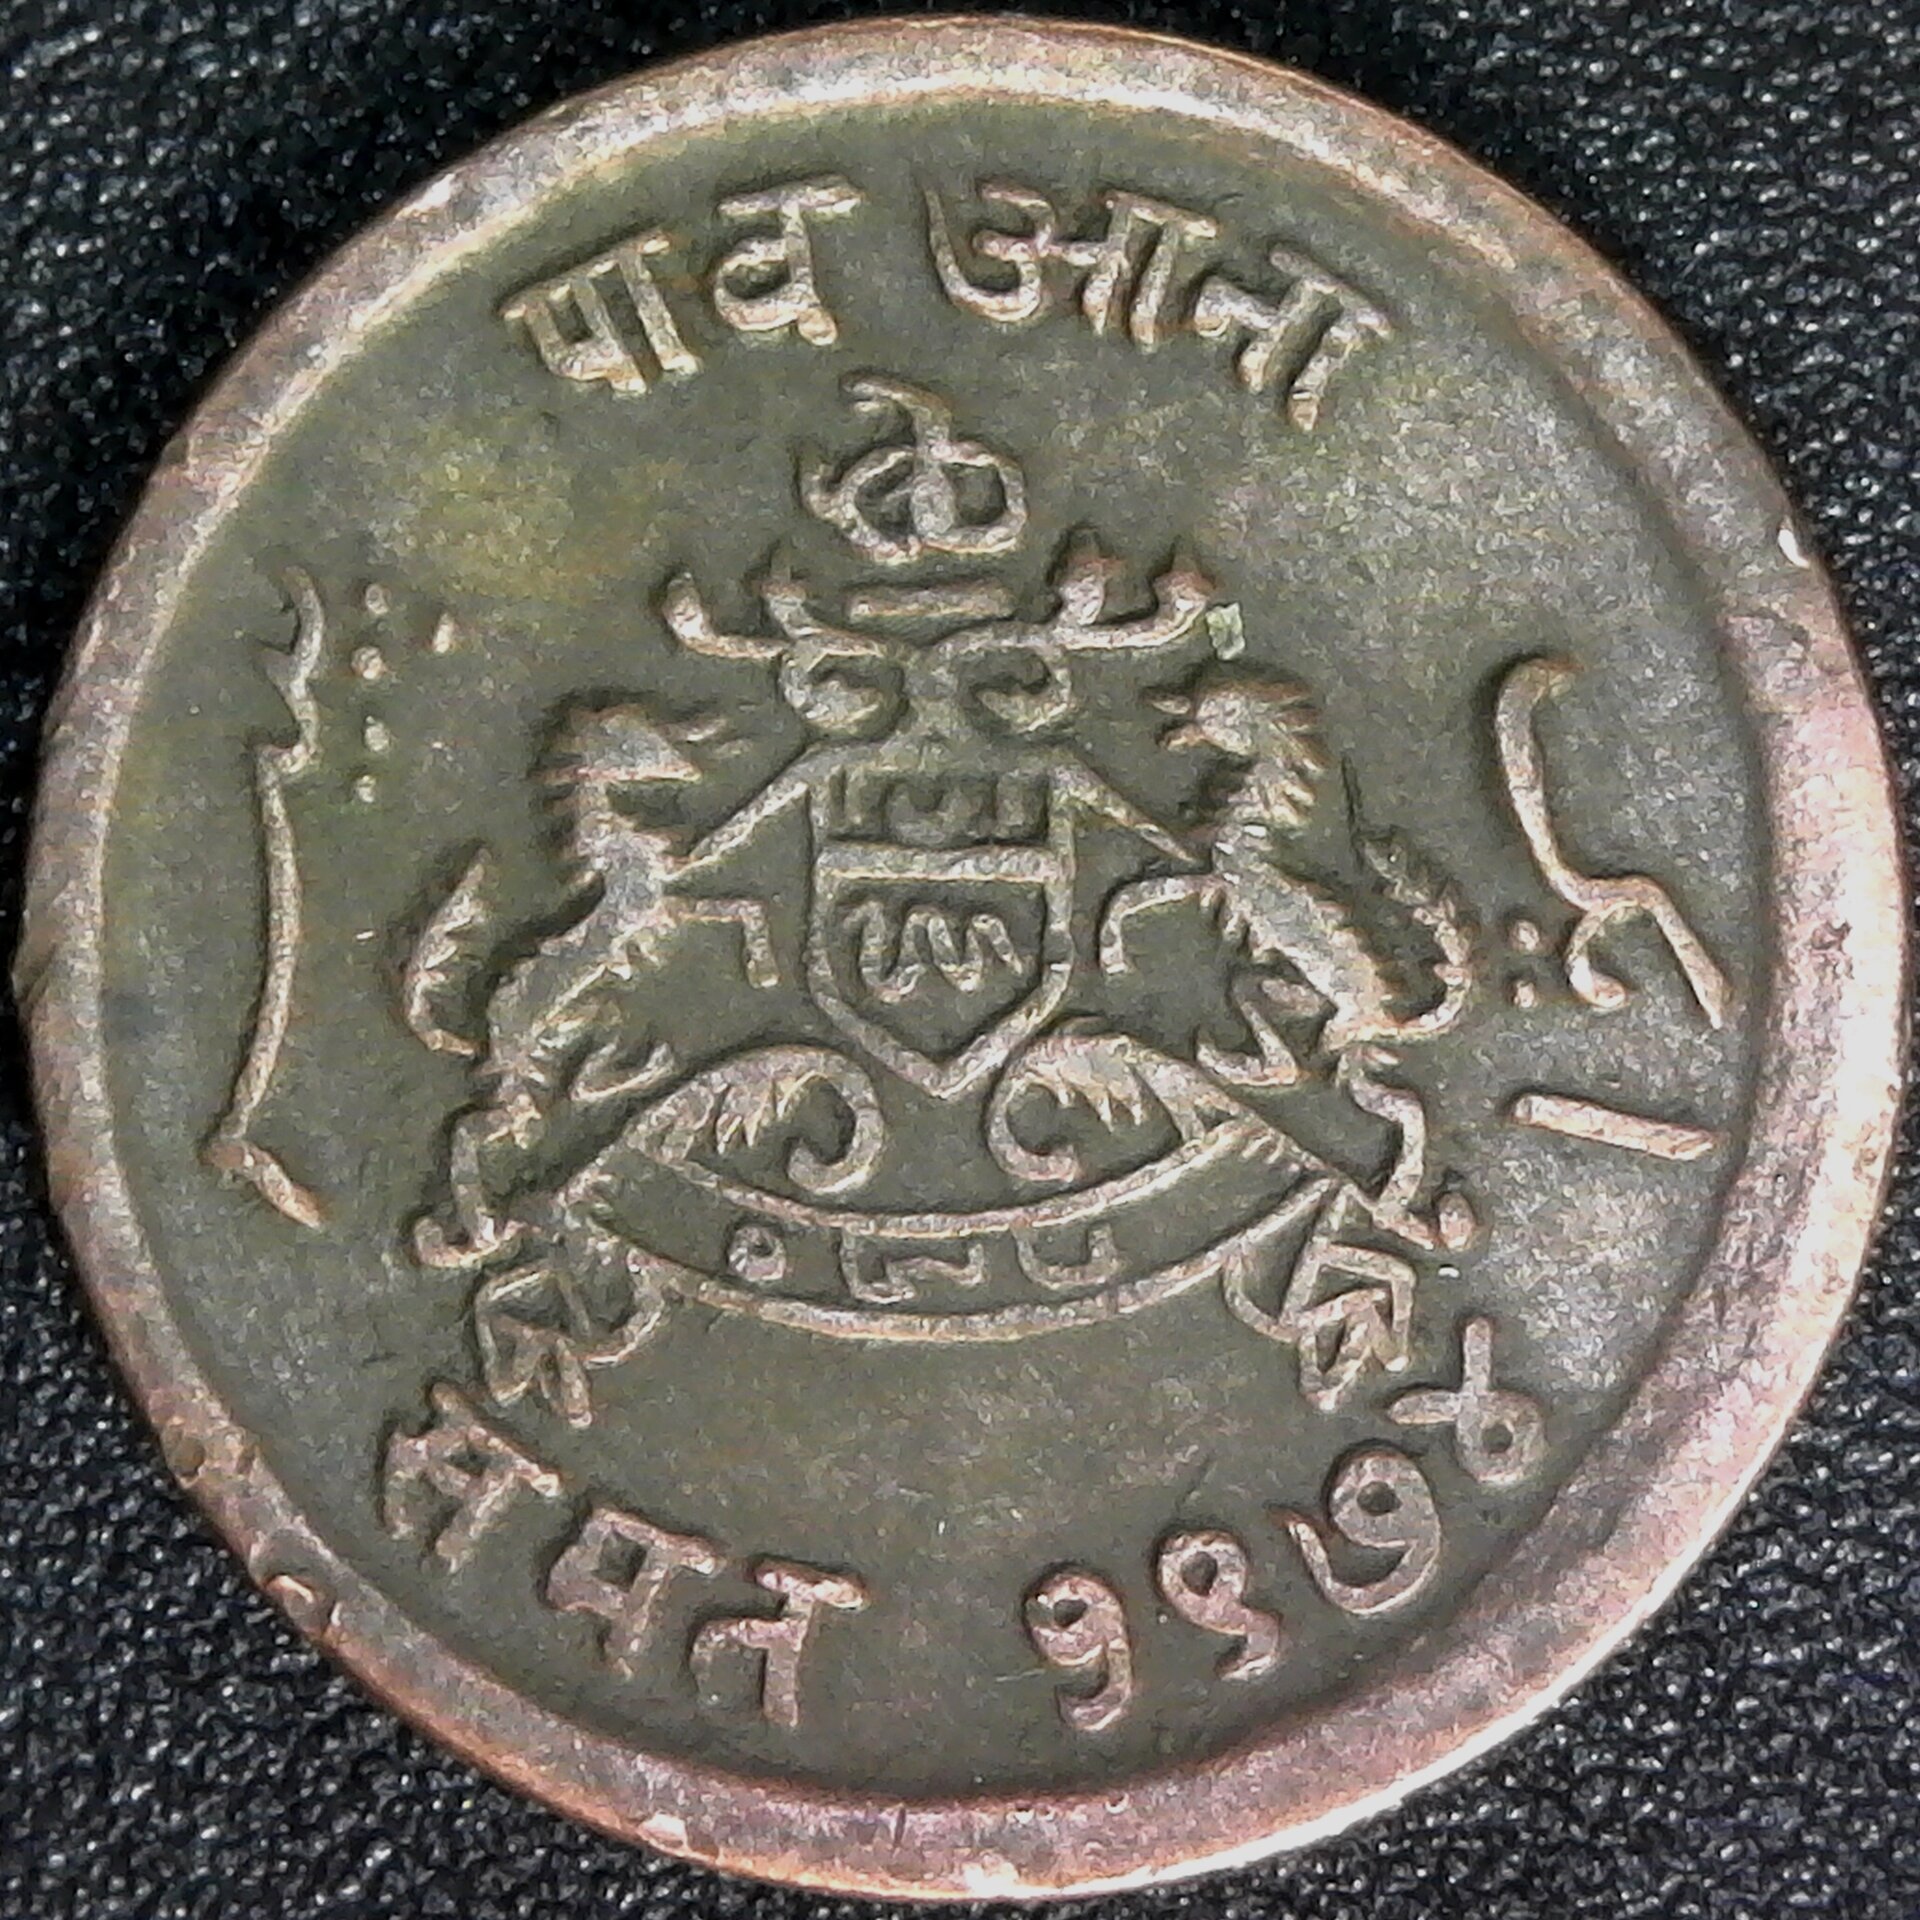 INDIA PRINCELY STATES,GWALIOR QTR ANNA VS1974-1917 BUST OF MADHO RAO rev.jpg